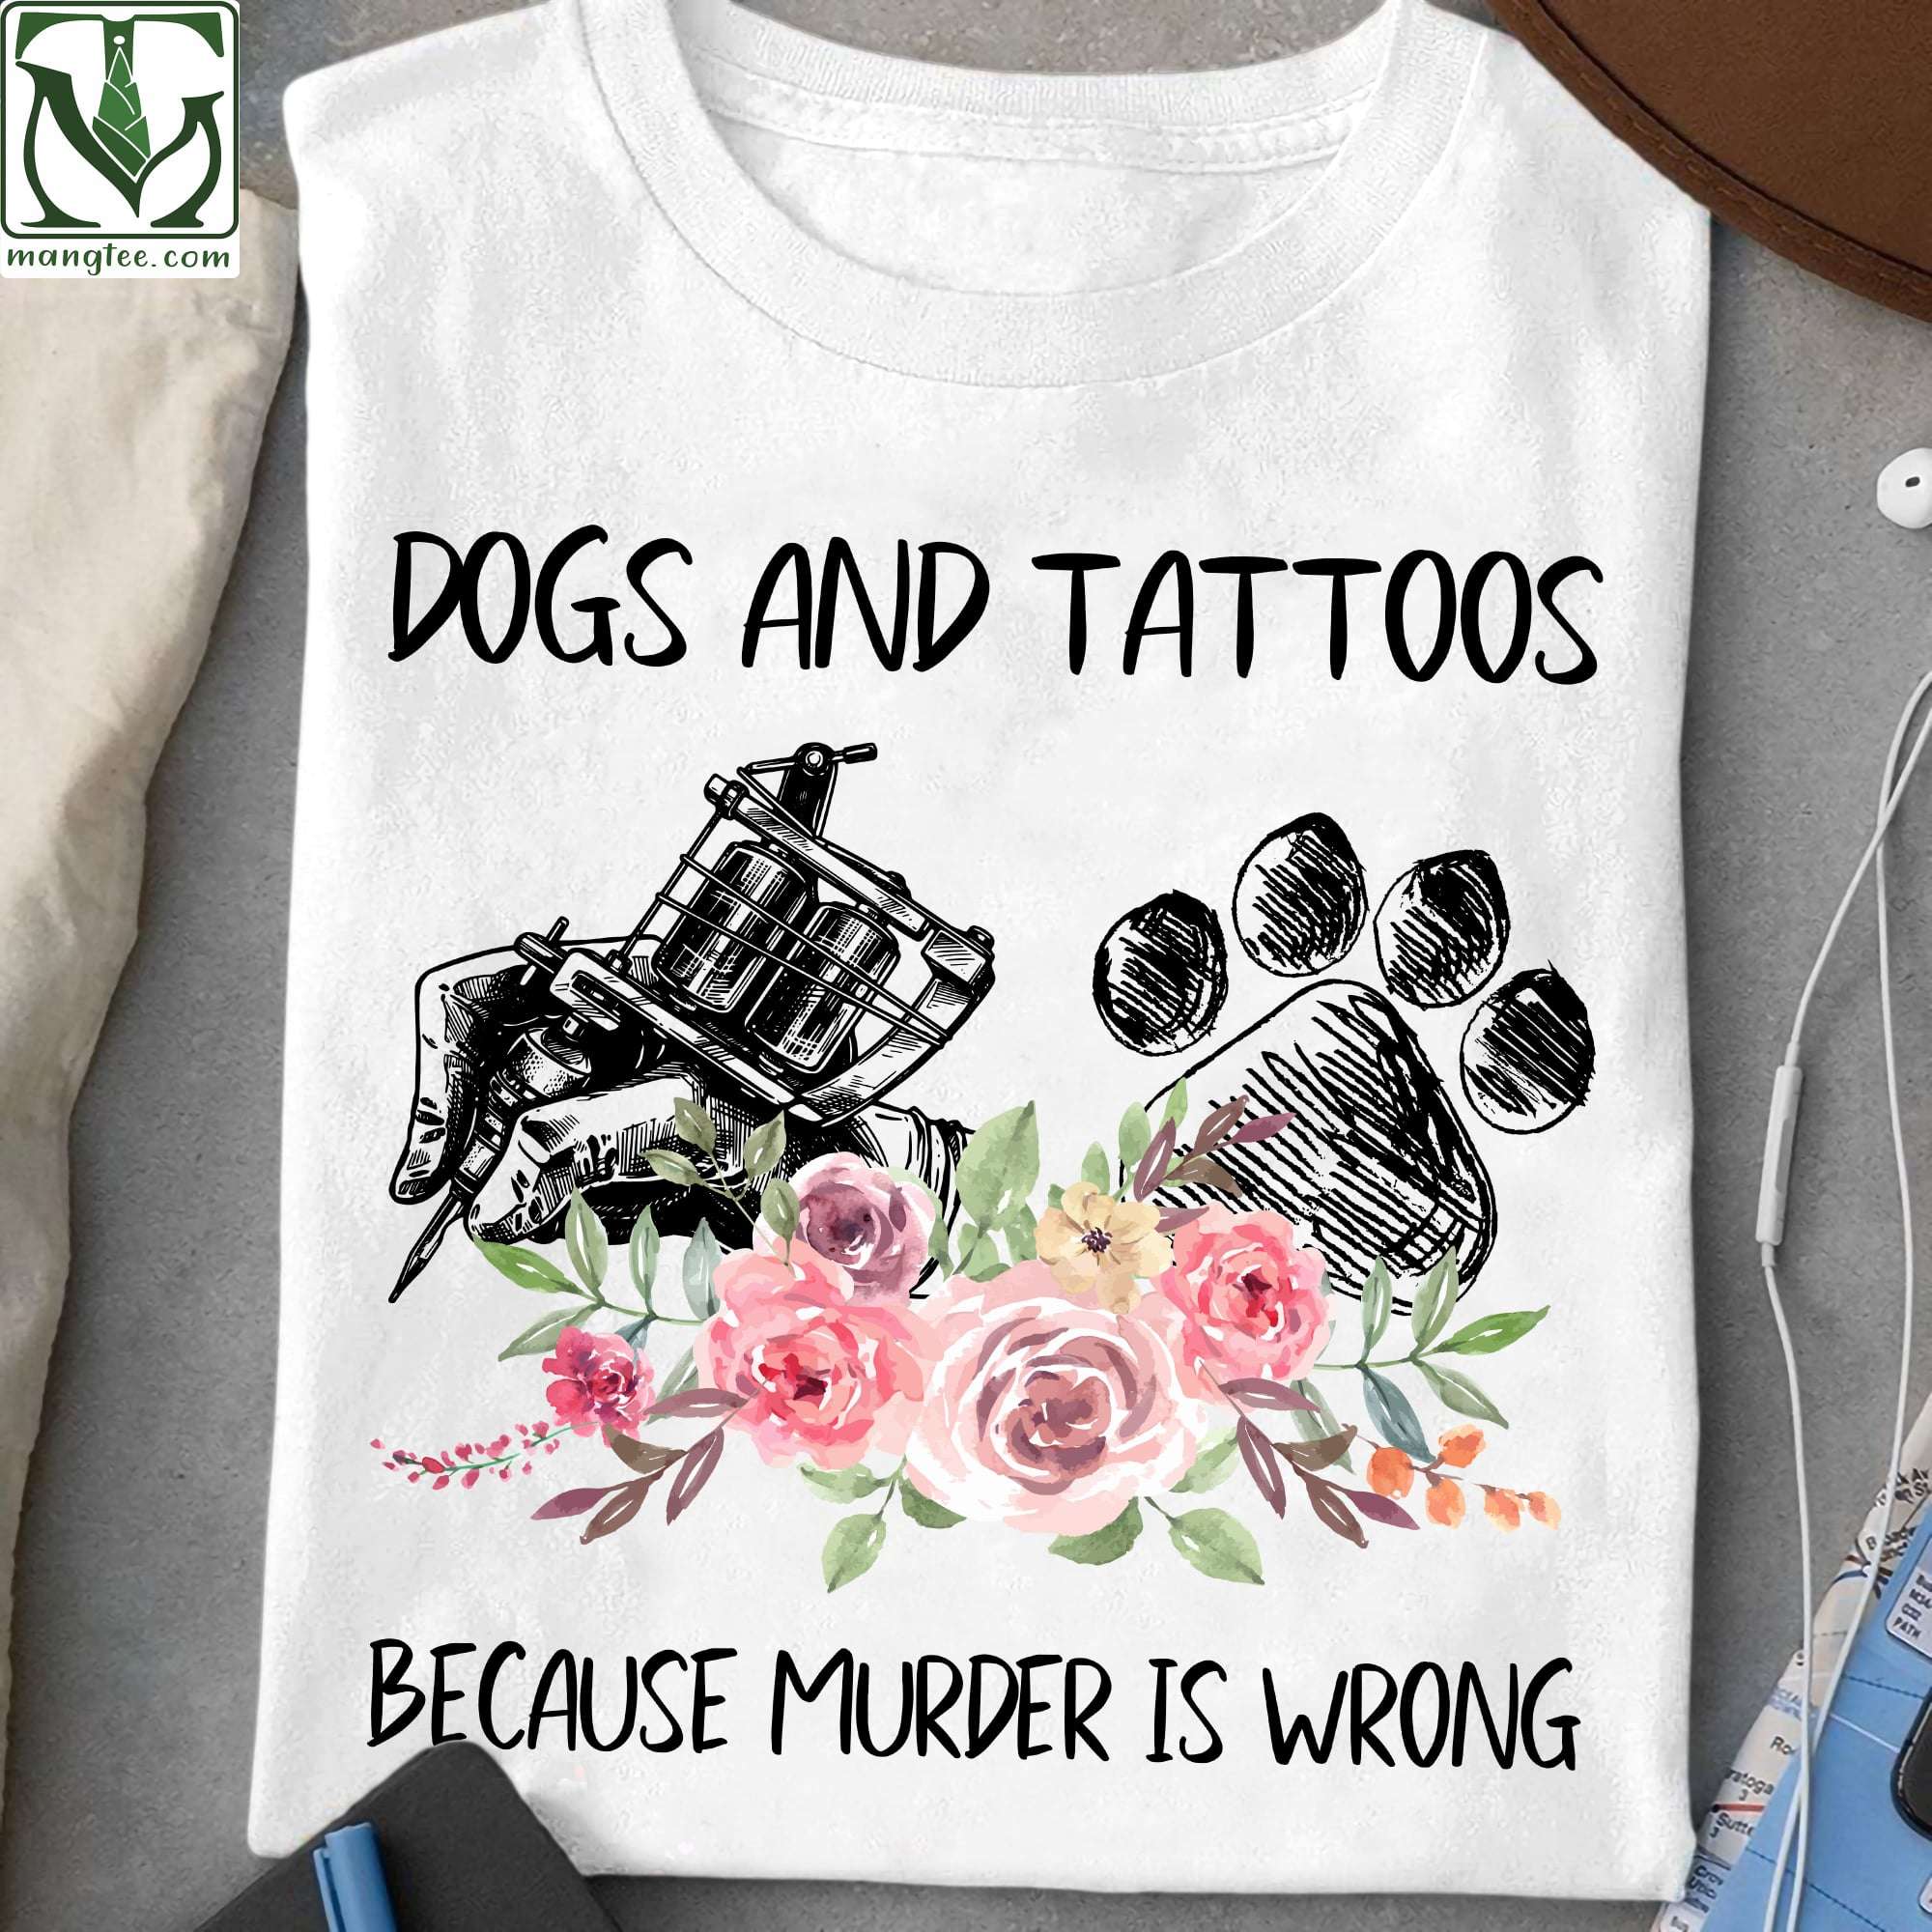 Dogs and tattoos because murder is wrong - Dog footprint and tattoo machine